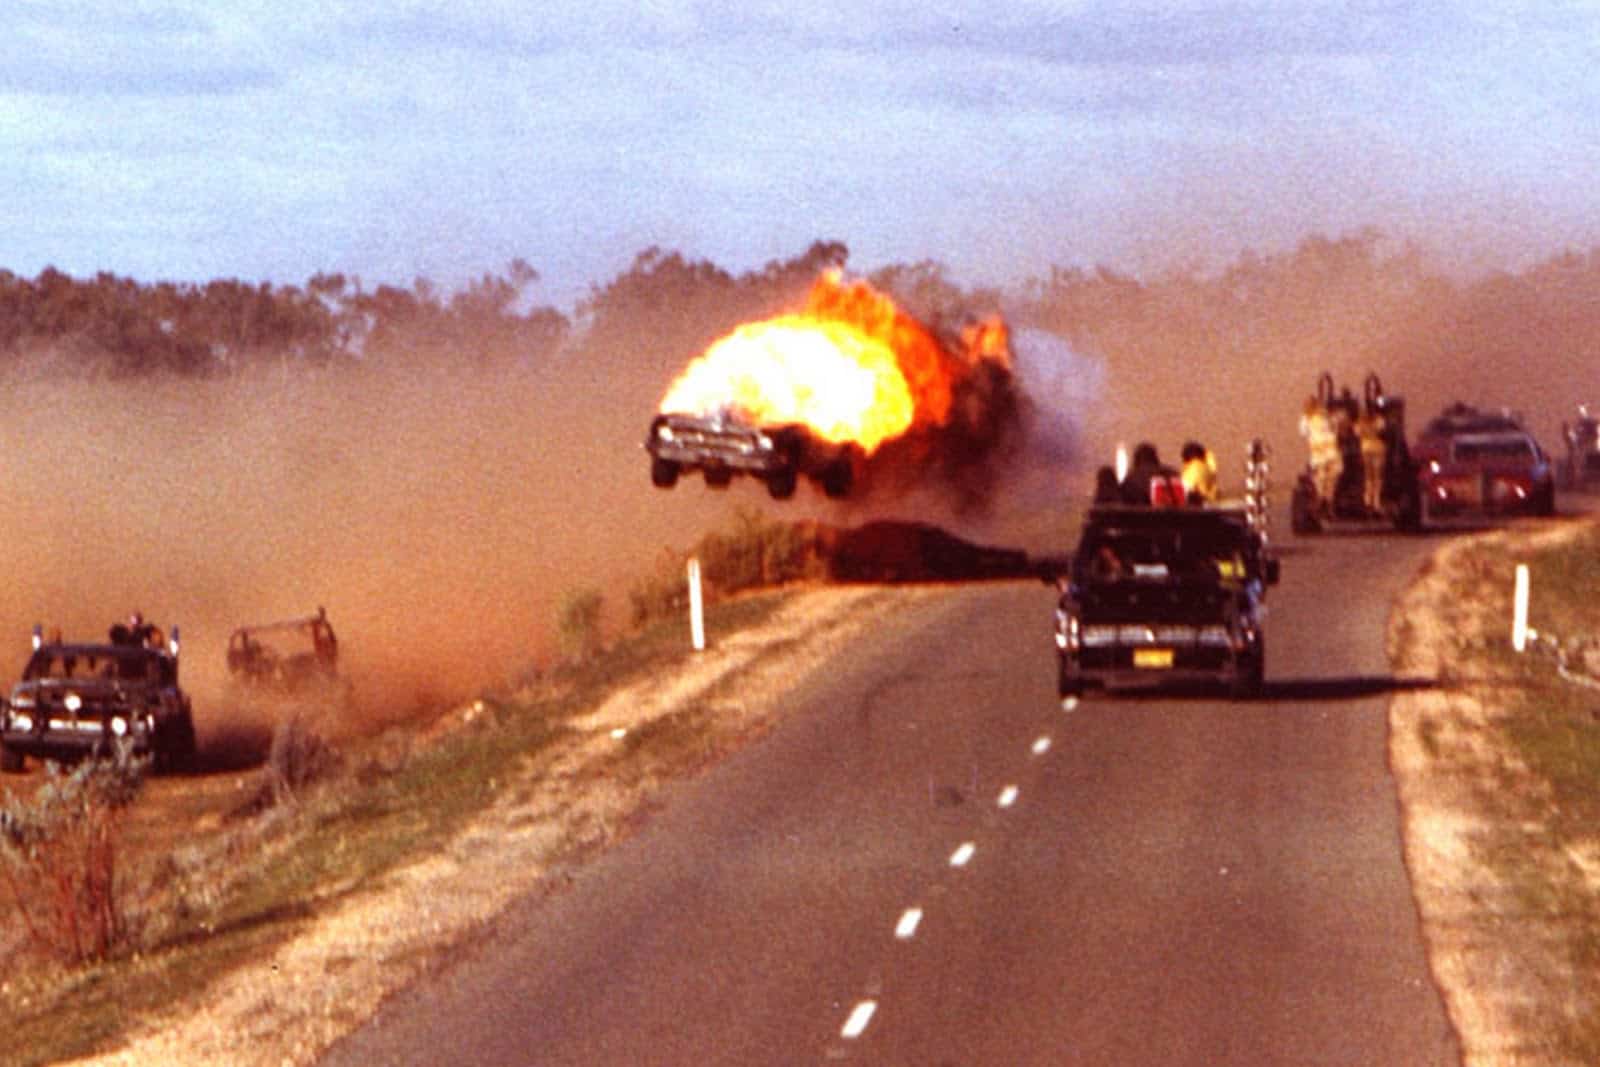 MAd Max 2 Car chase